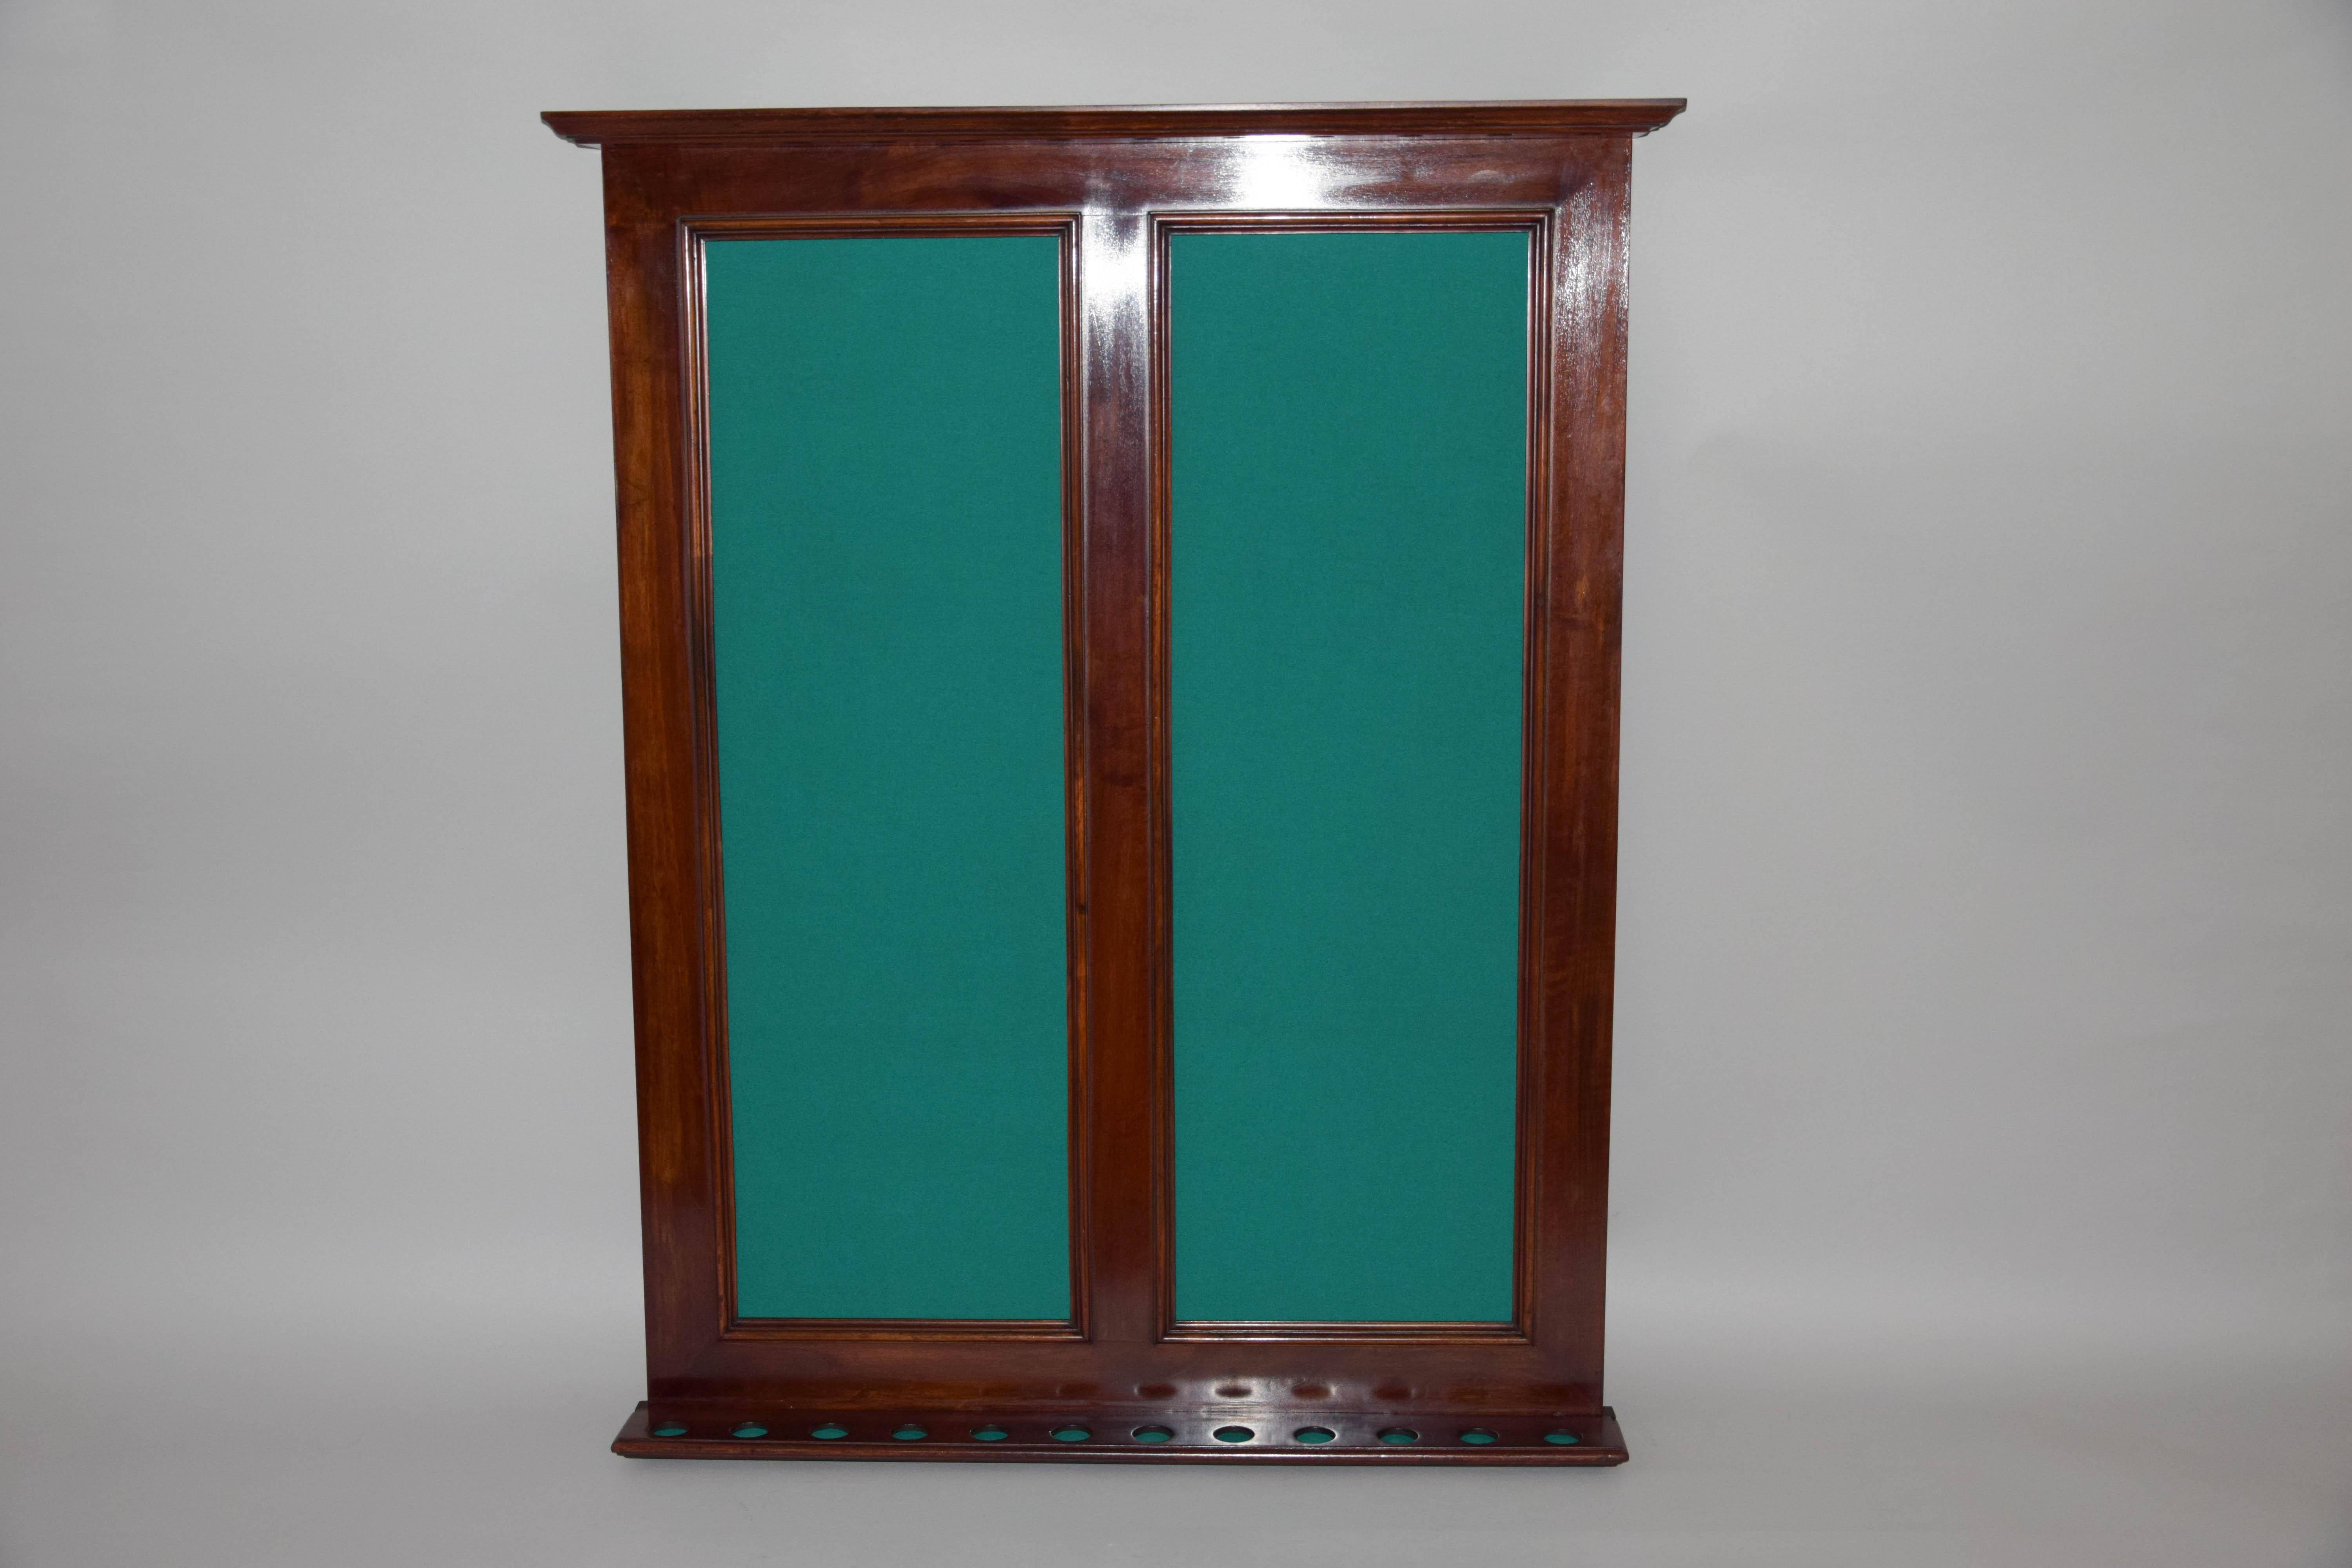 Art Nouveau/Art Deco wall mount billiard cue rack for 12 cues used in pub. Circa 1910s-1920s. Restored, new shellac hand polished, new green billiard fabric.